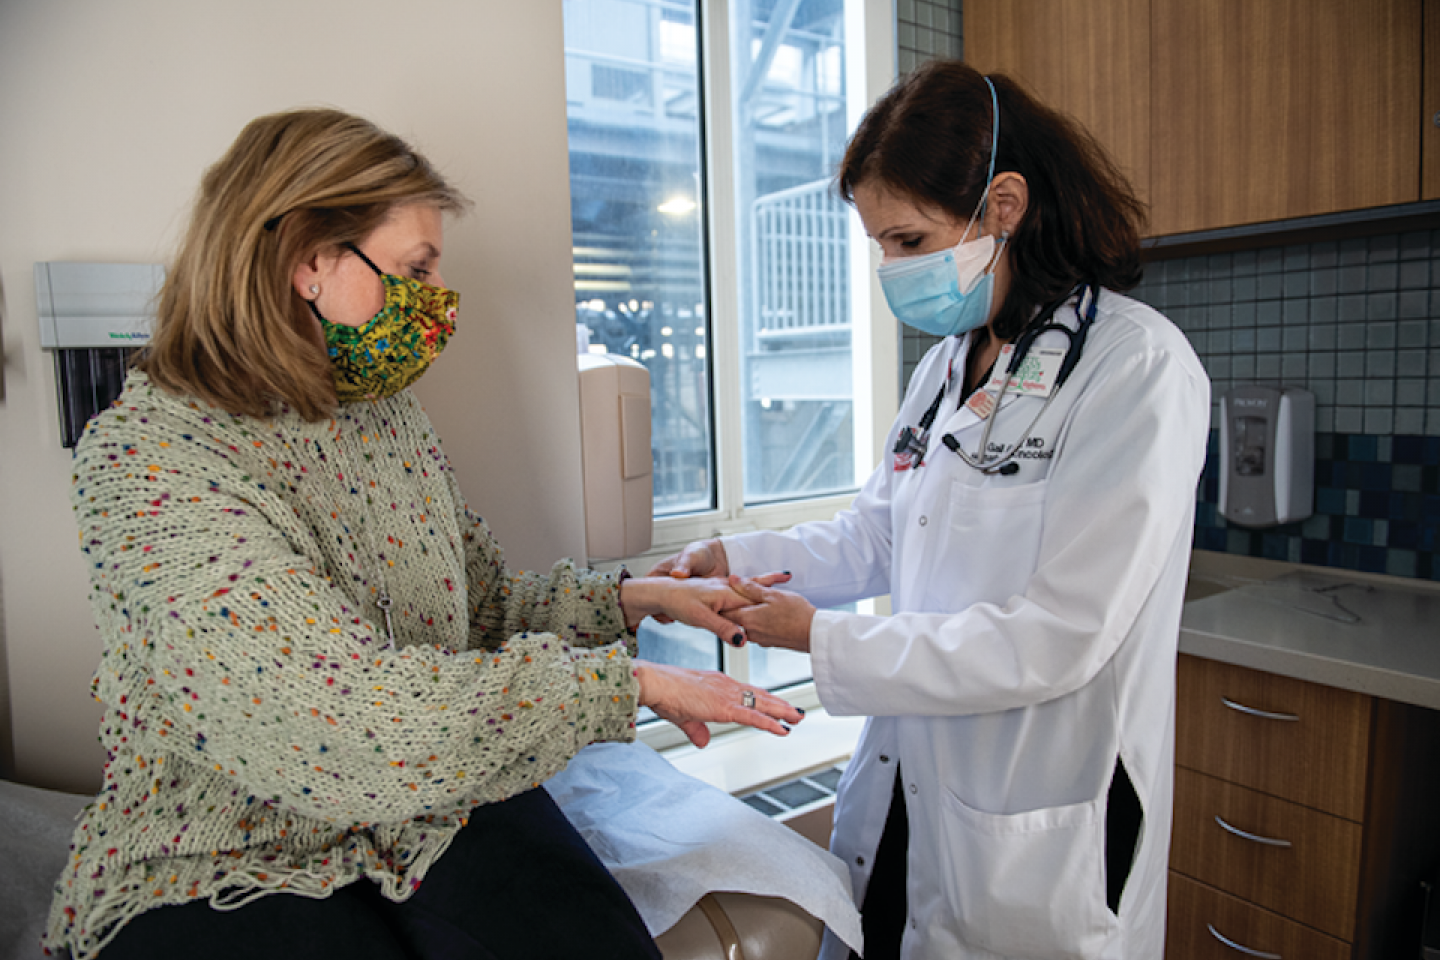 Dr. Gail Roboz (above right), examines patient Cheryl Bonder this spring as part of her ongoing treatment.